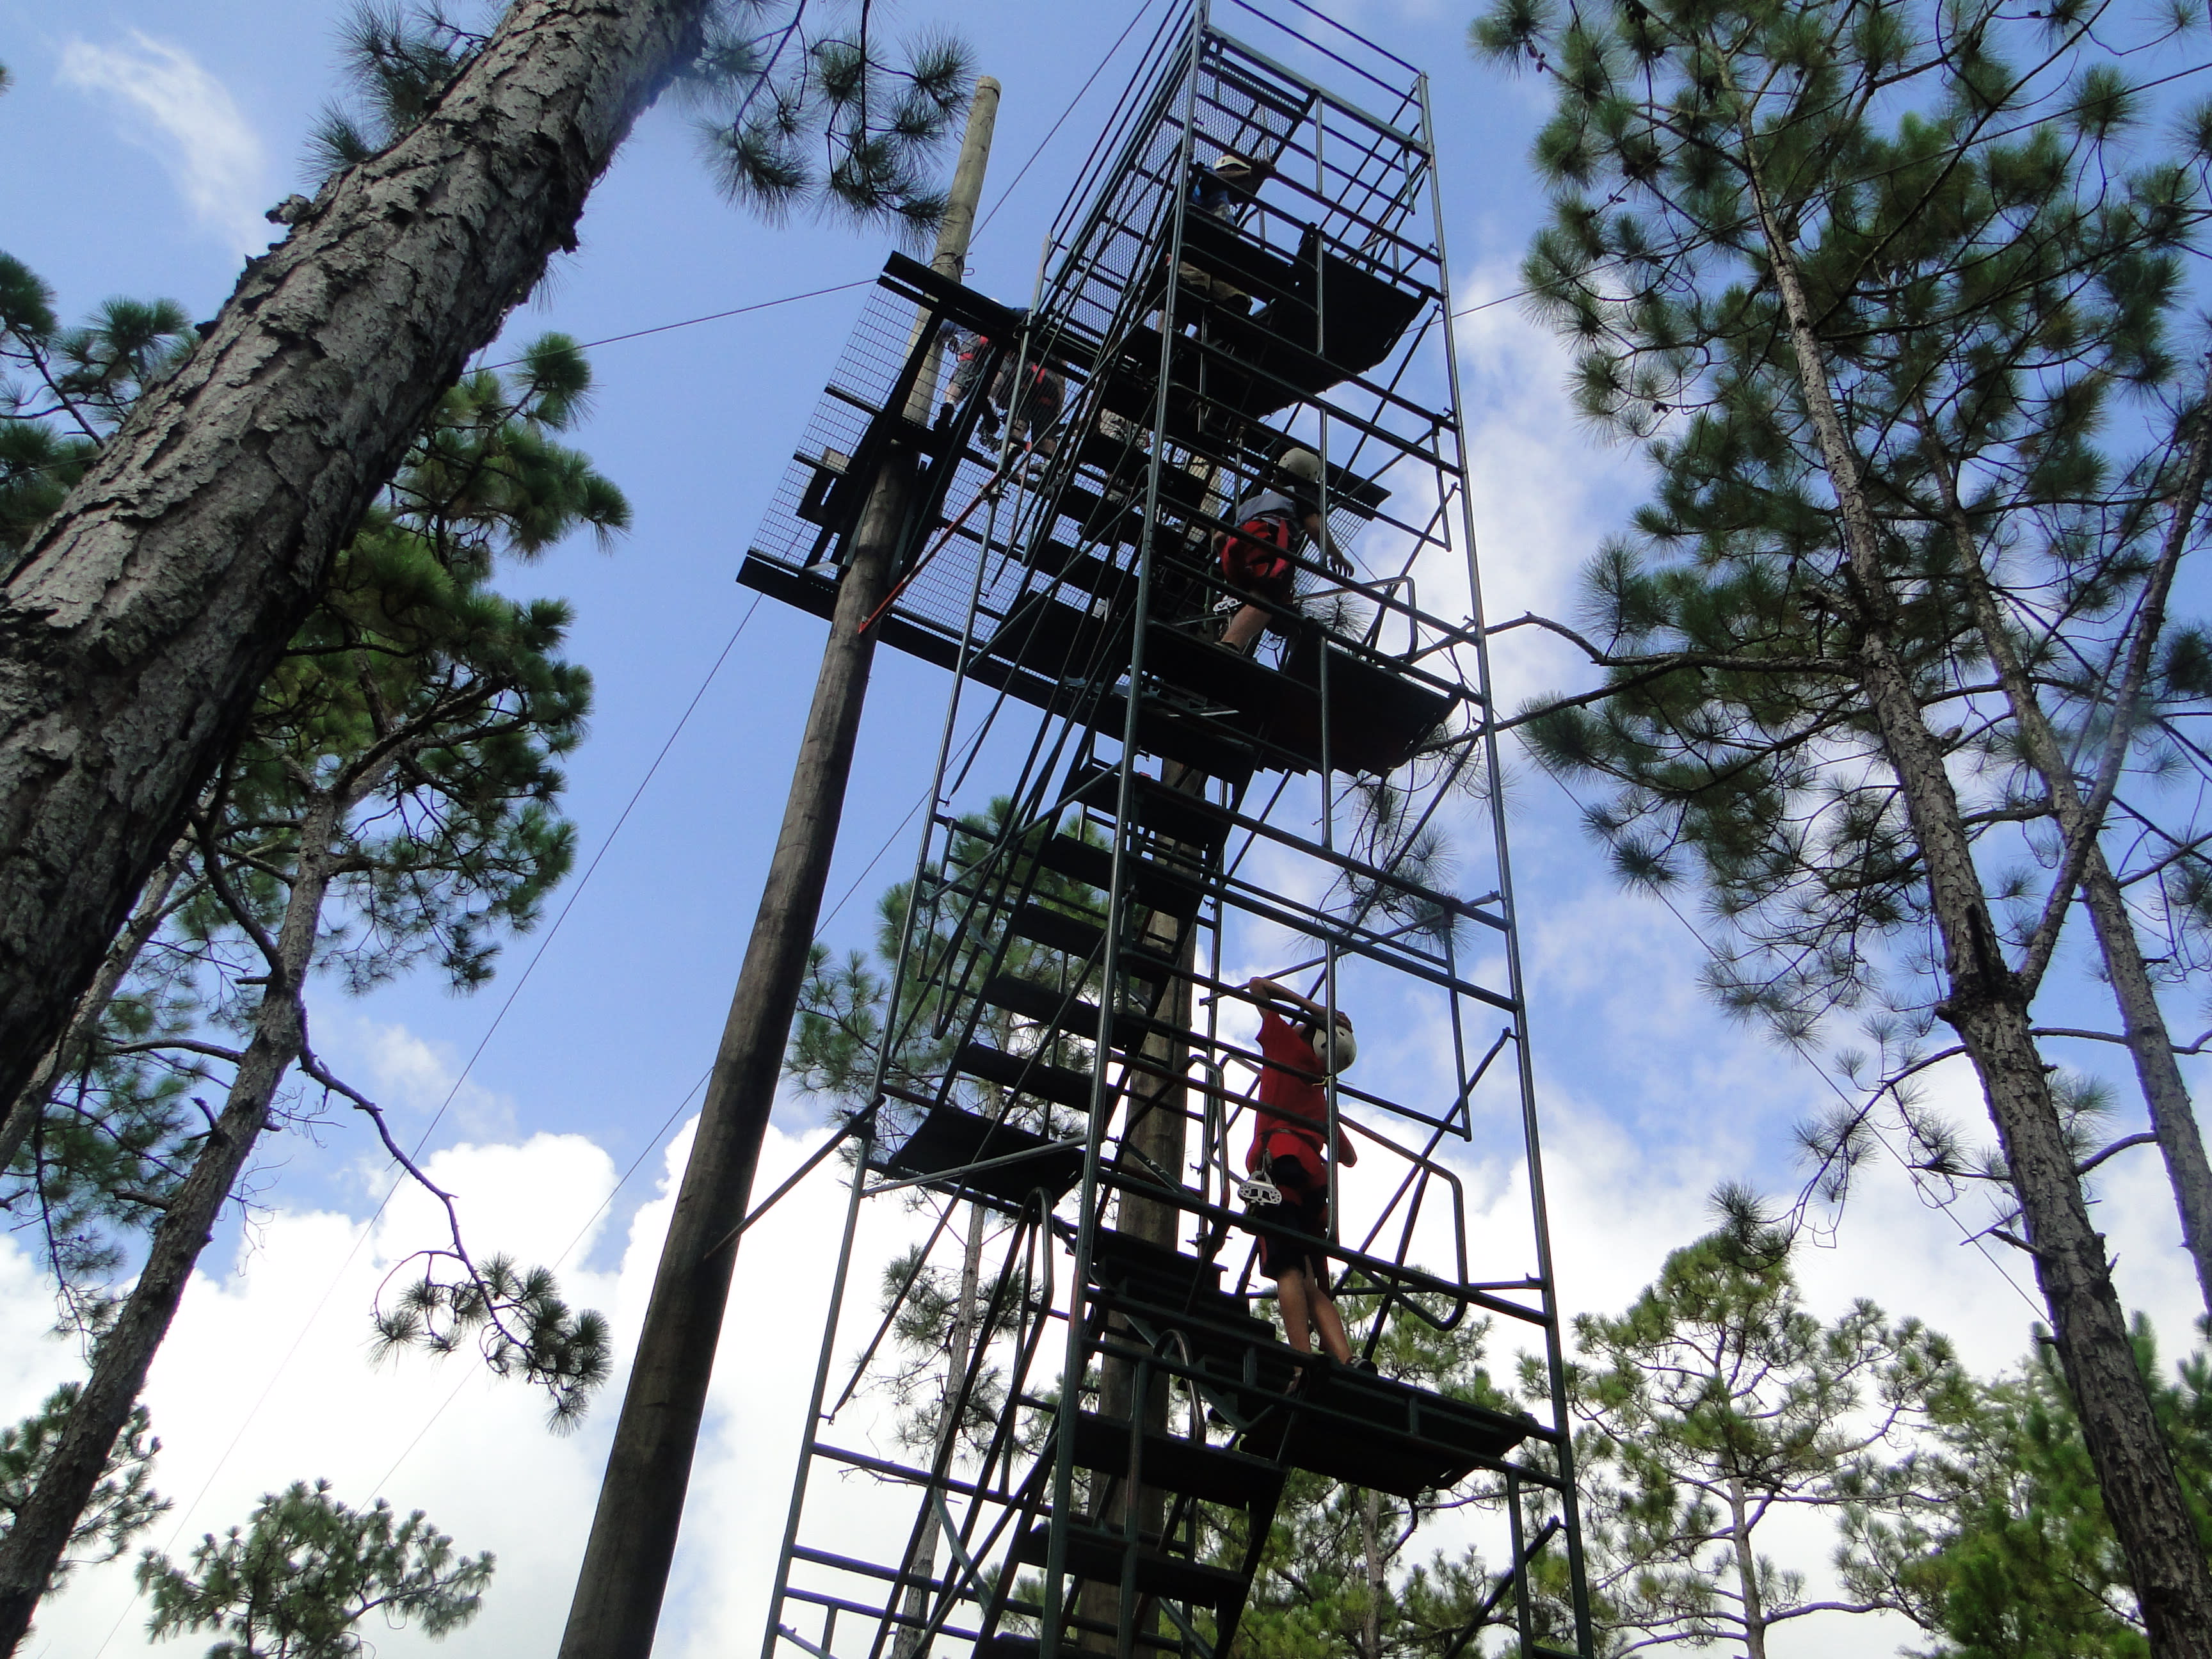 Look how tall this zipline tower is!